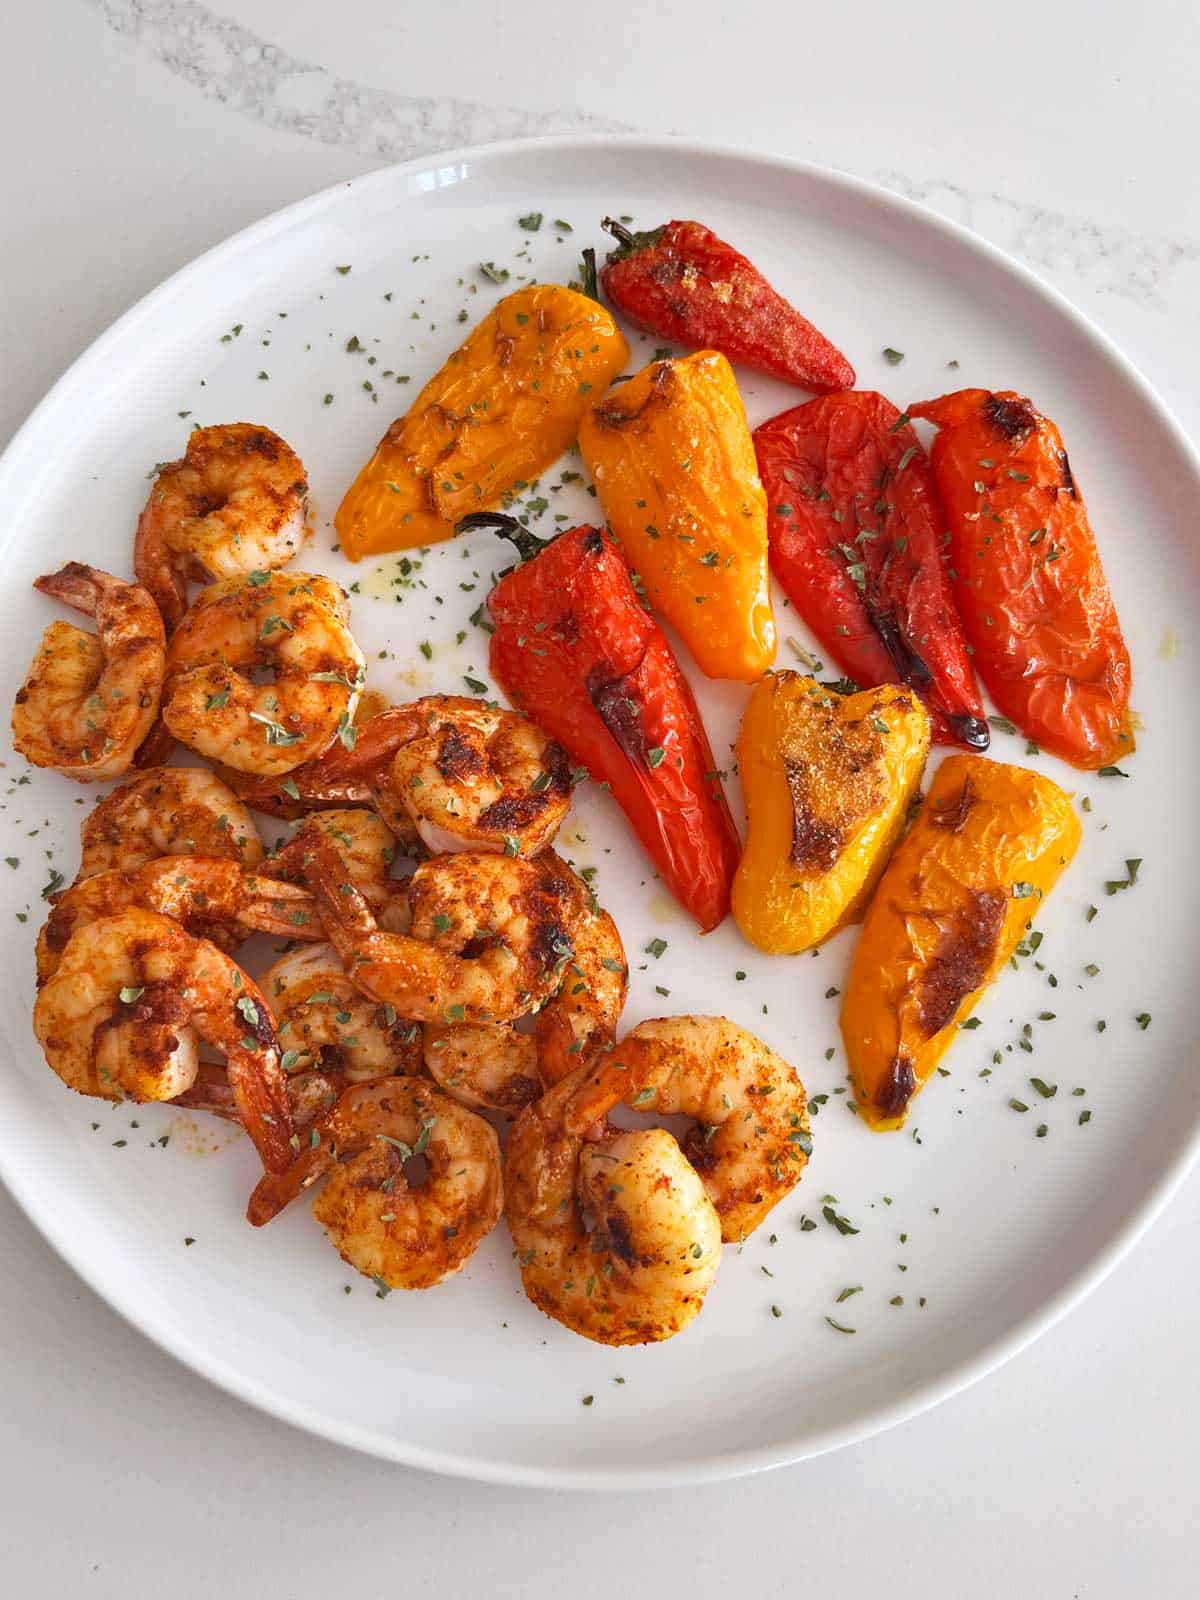 The peppers are served with shrimp.